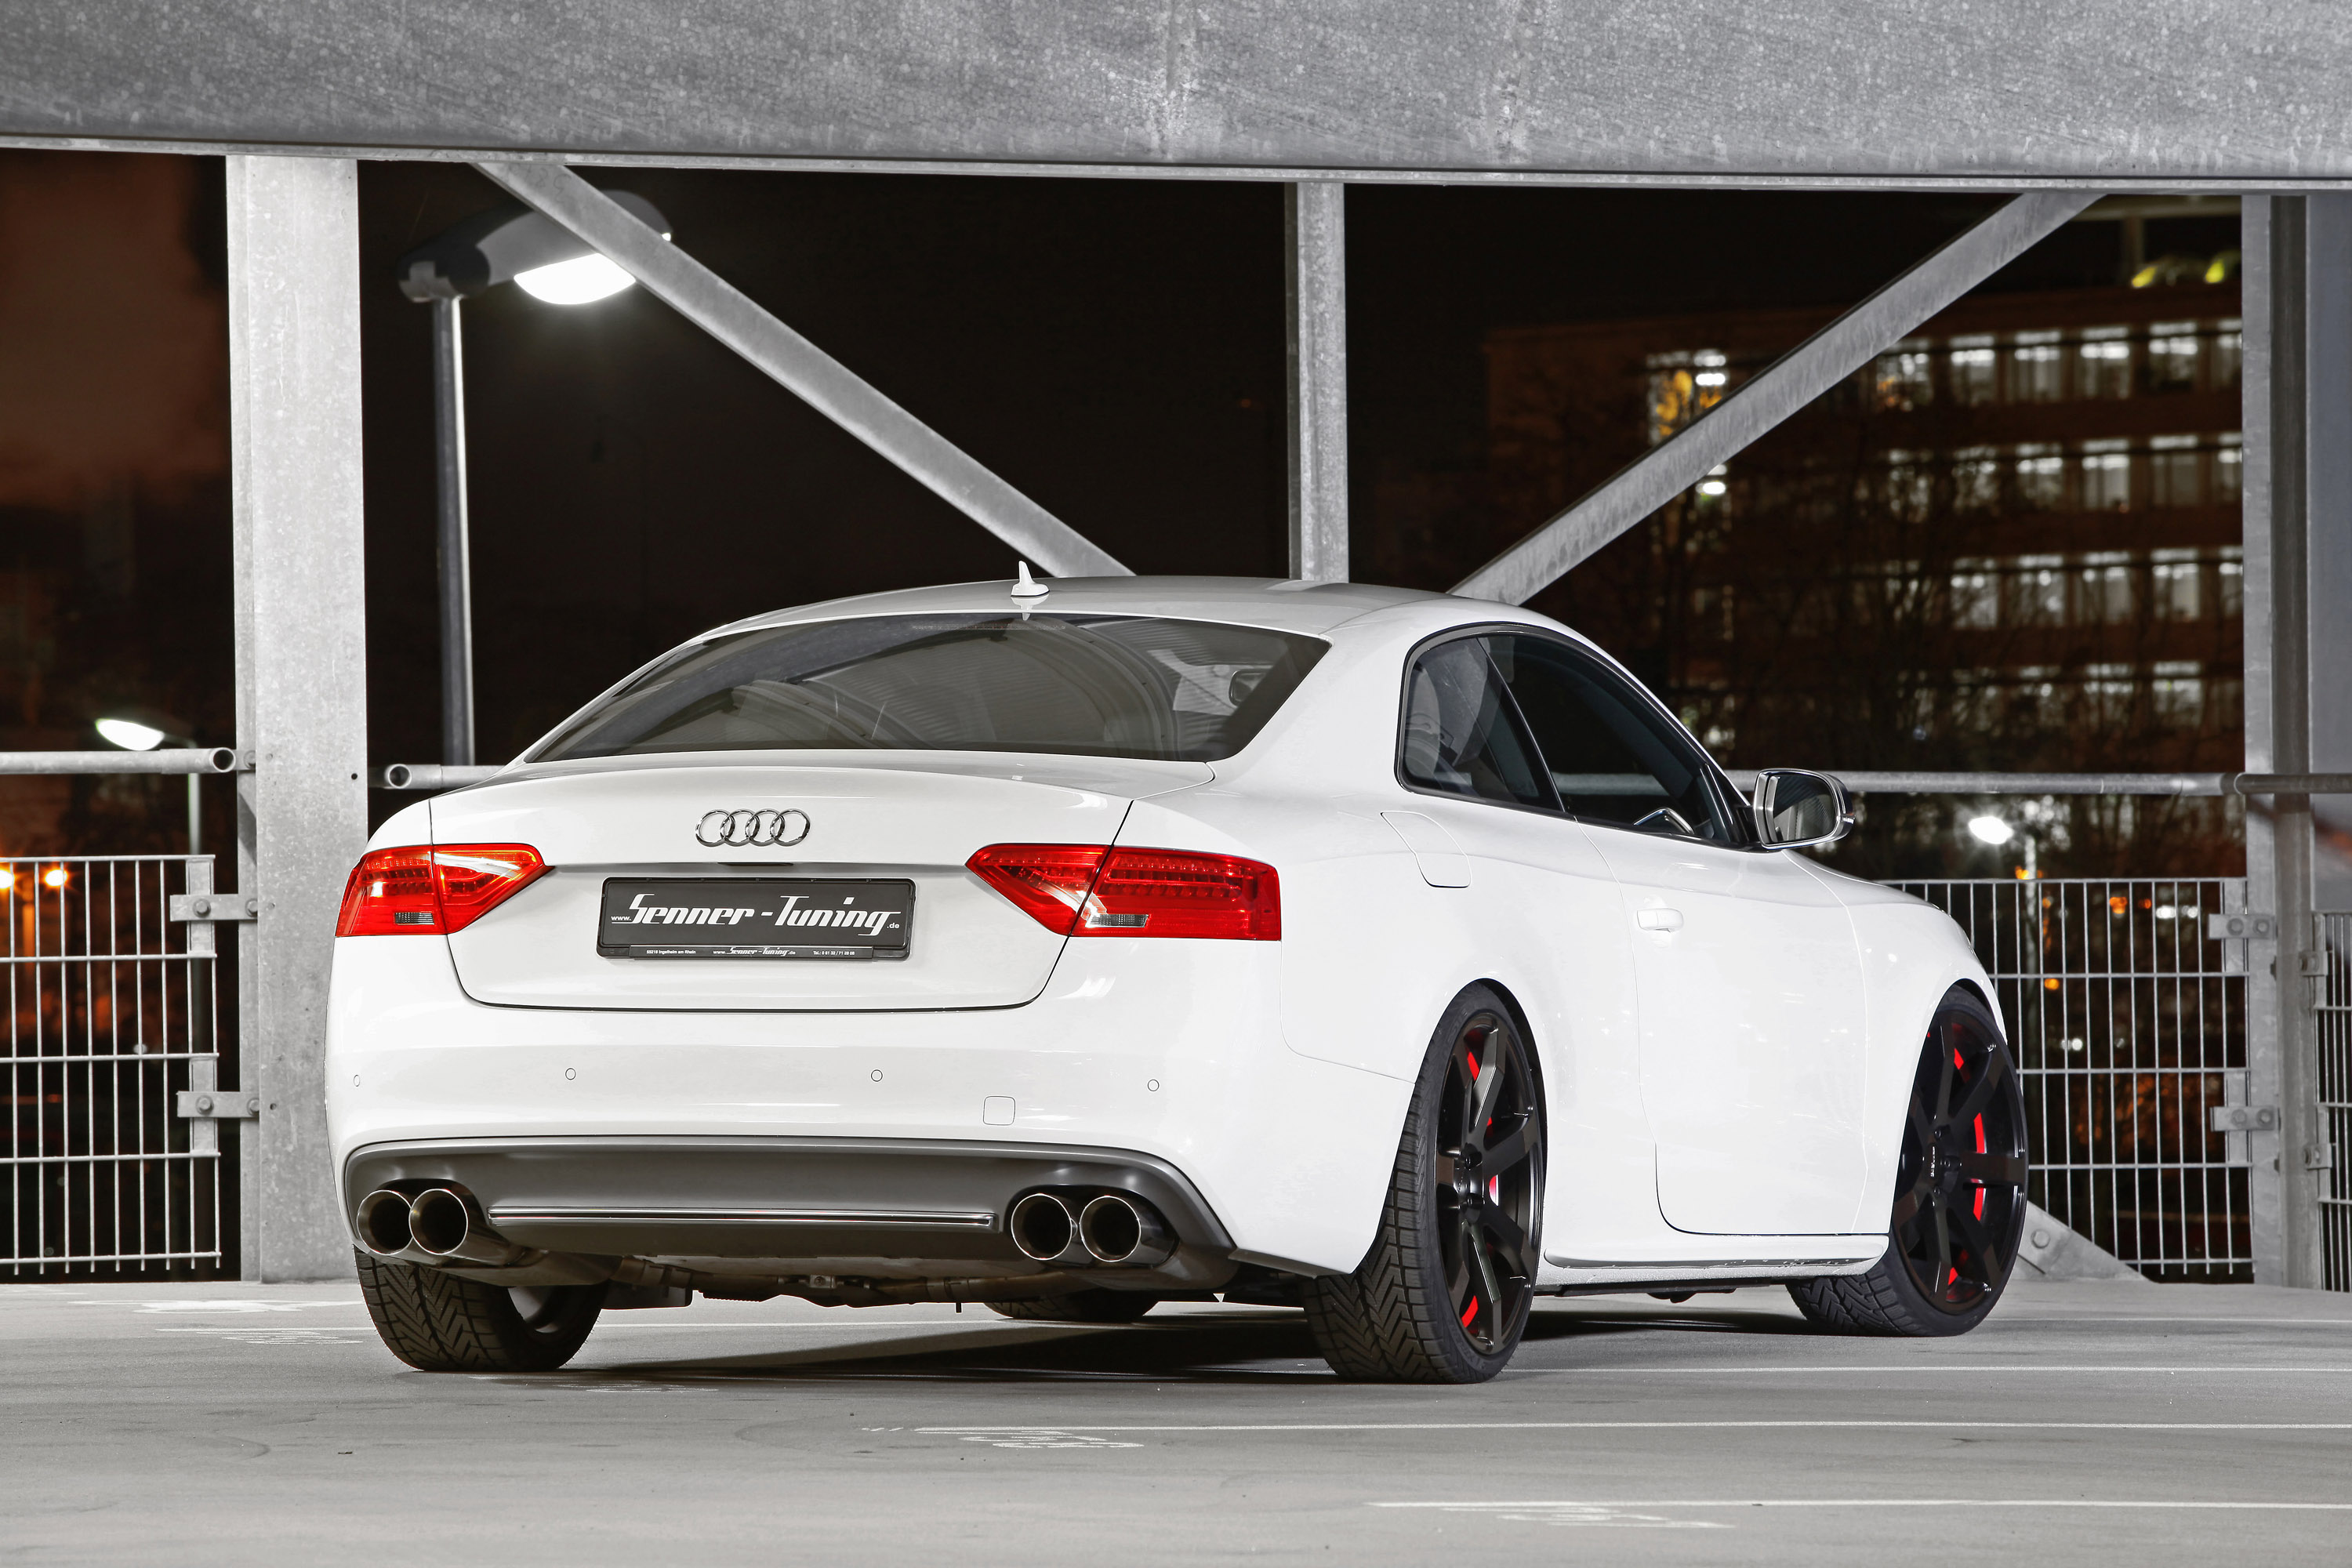 2012, Senner, Audi, S 5, Coupe, Tuning Wallpaper